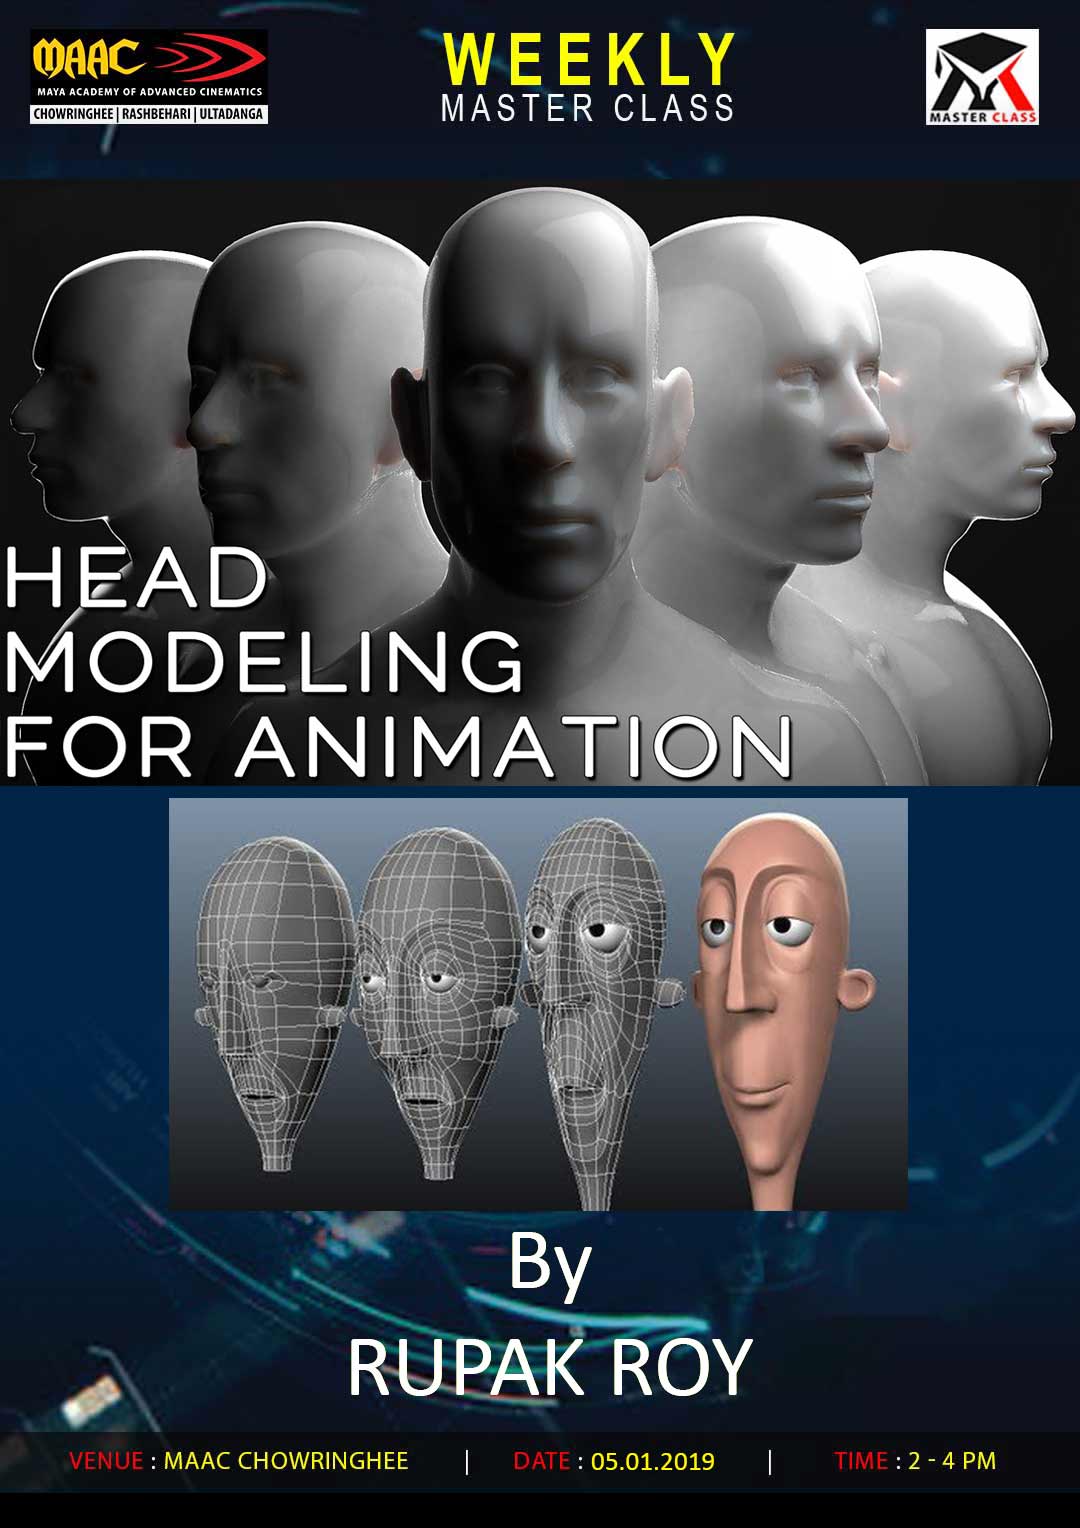 Weekly Master Class on Head Modeling for Animation